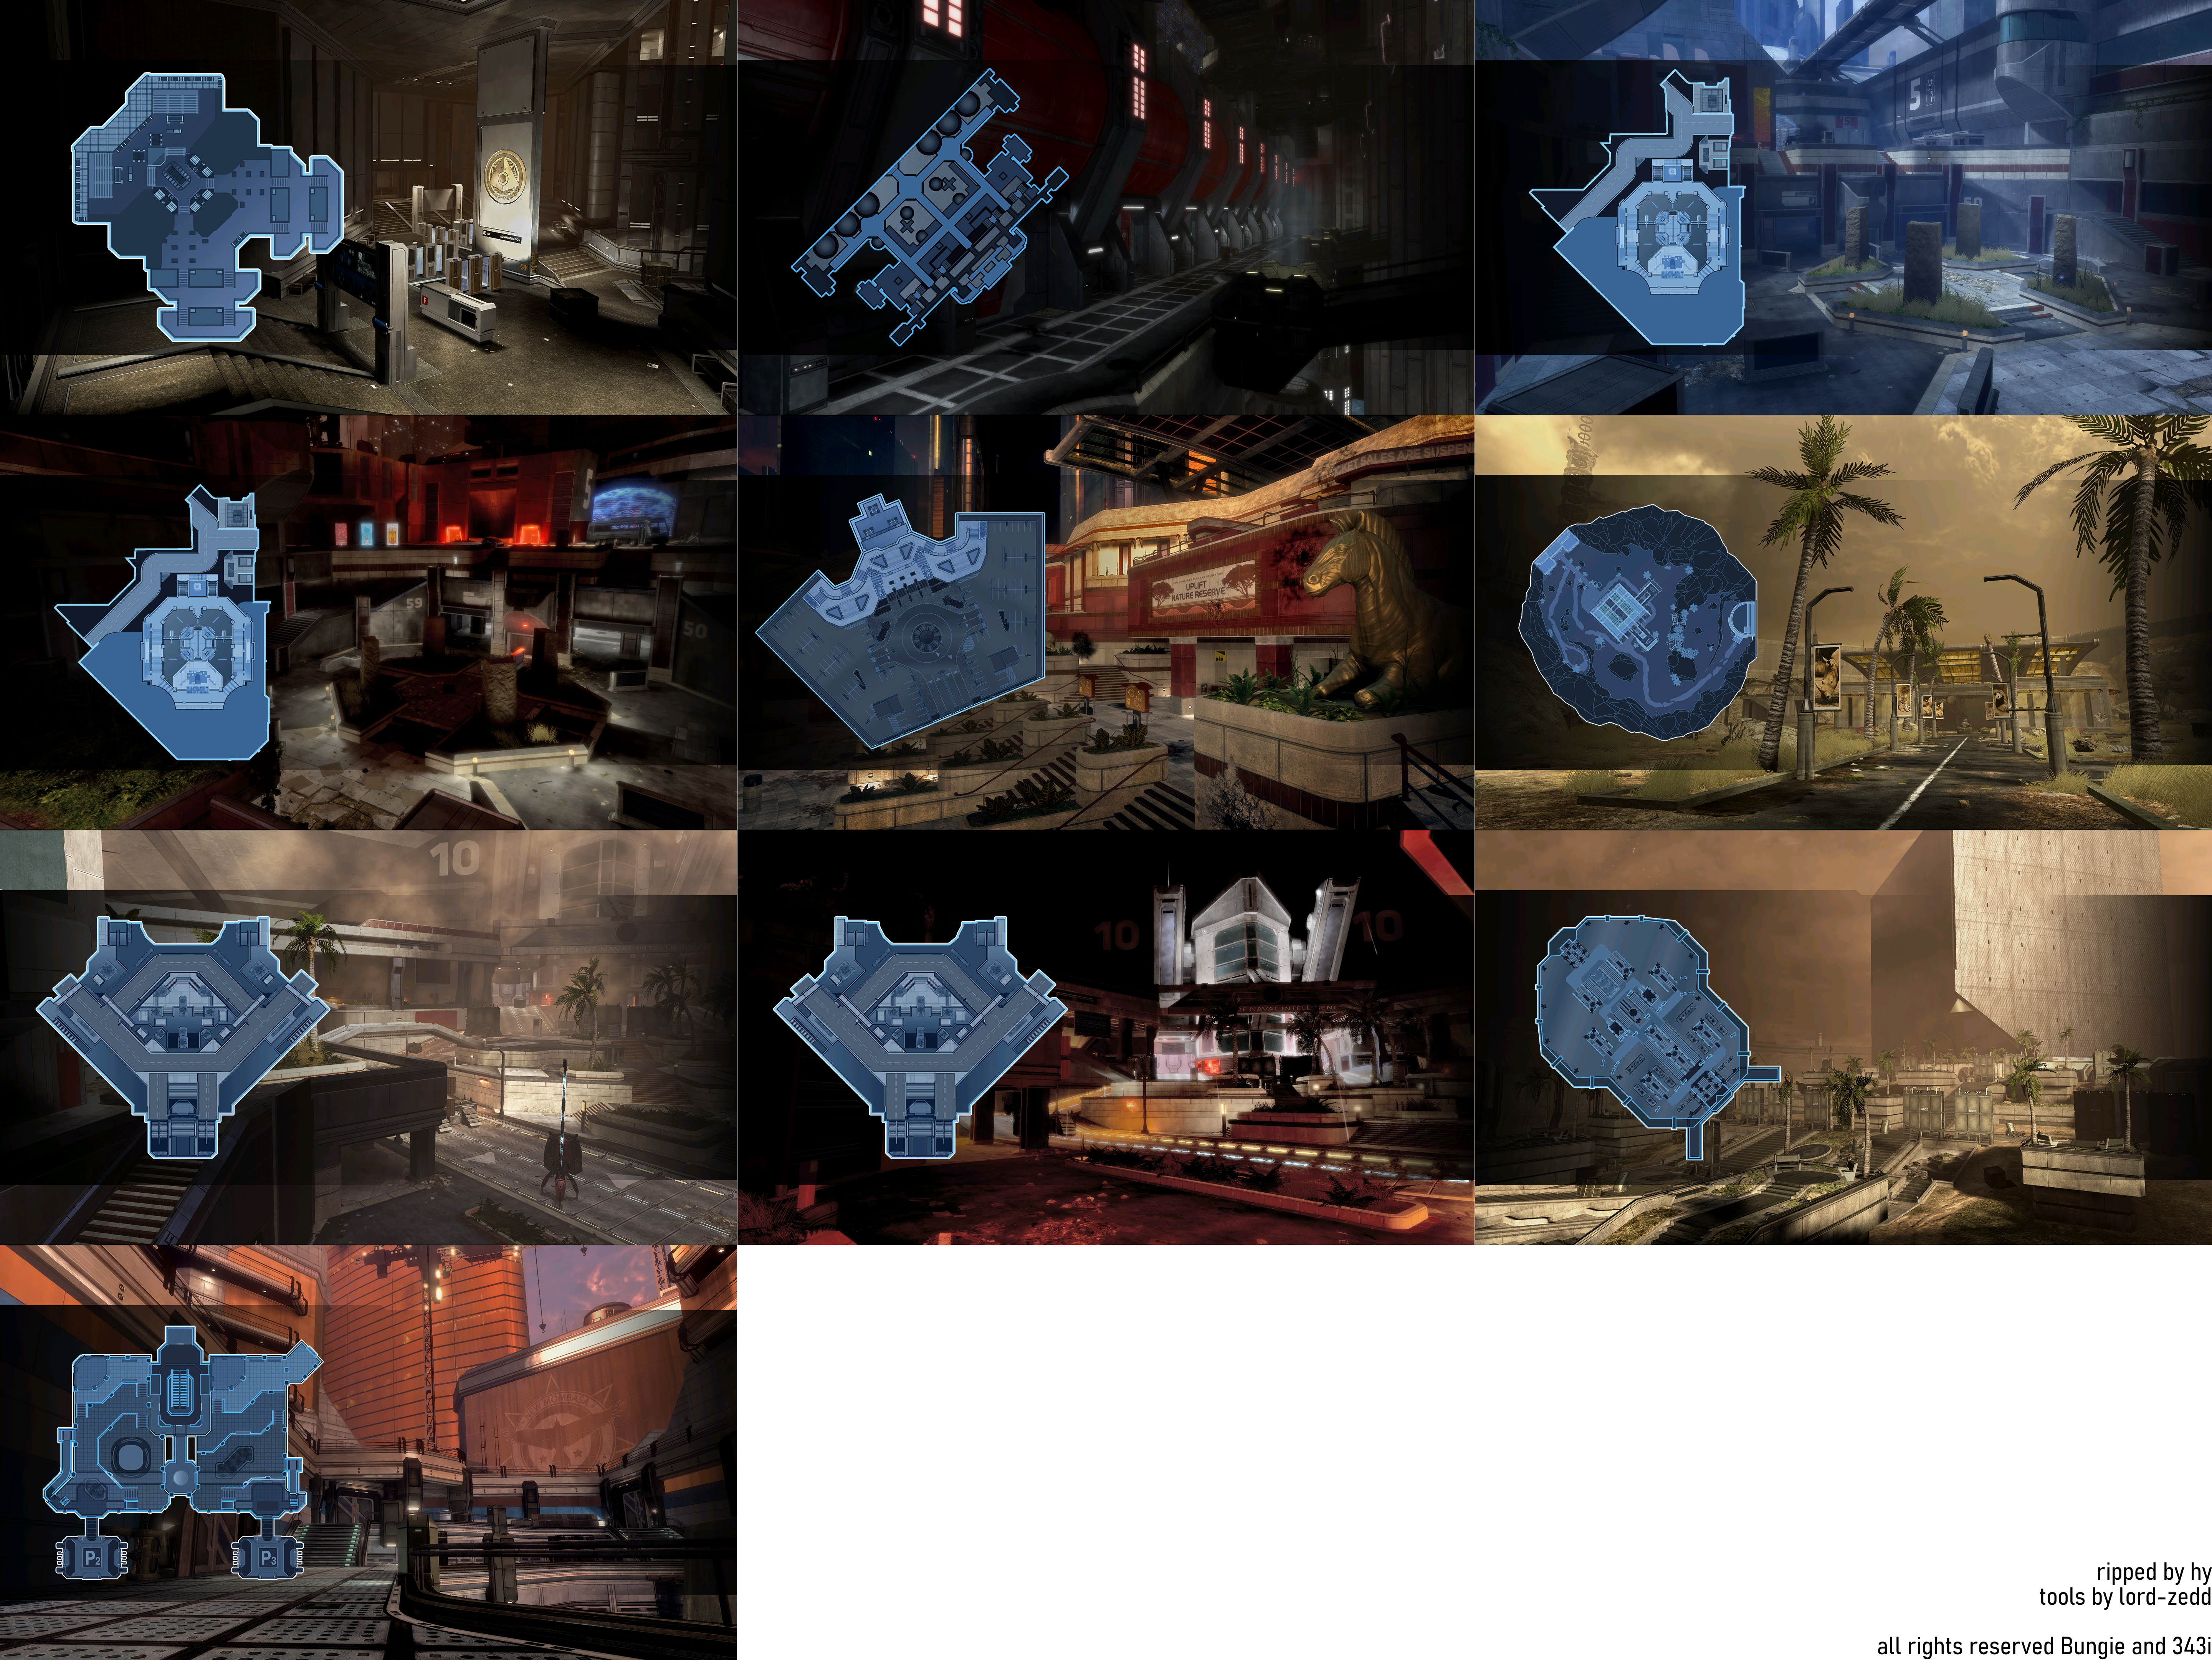 Halo: The Master Chief Collection - Halo 3: ODST Firefight Level Loading Screens